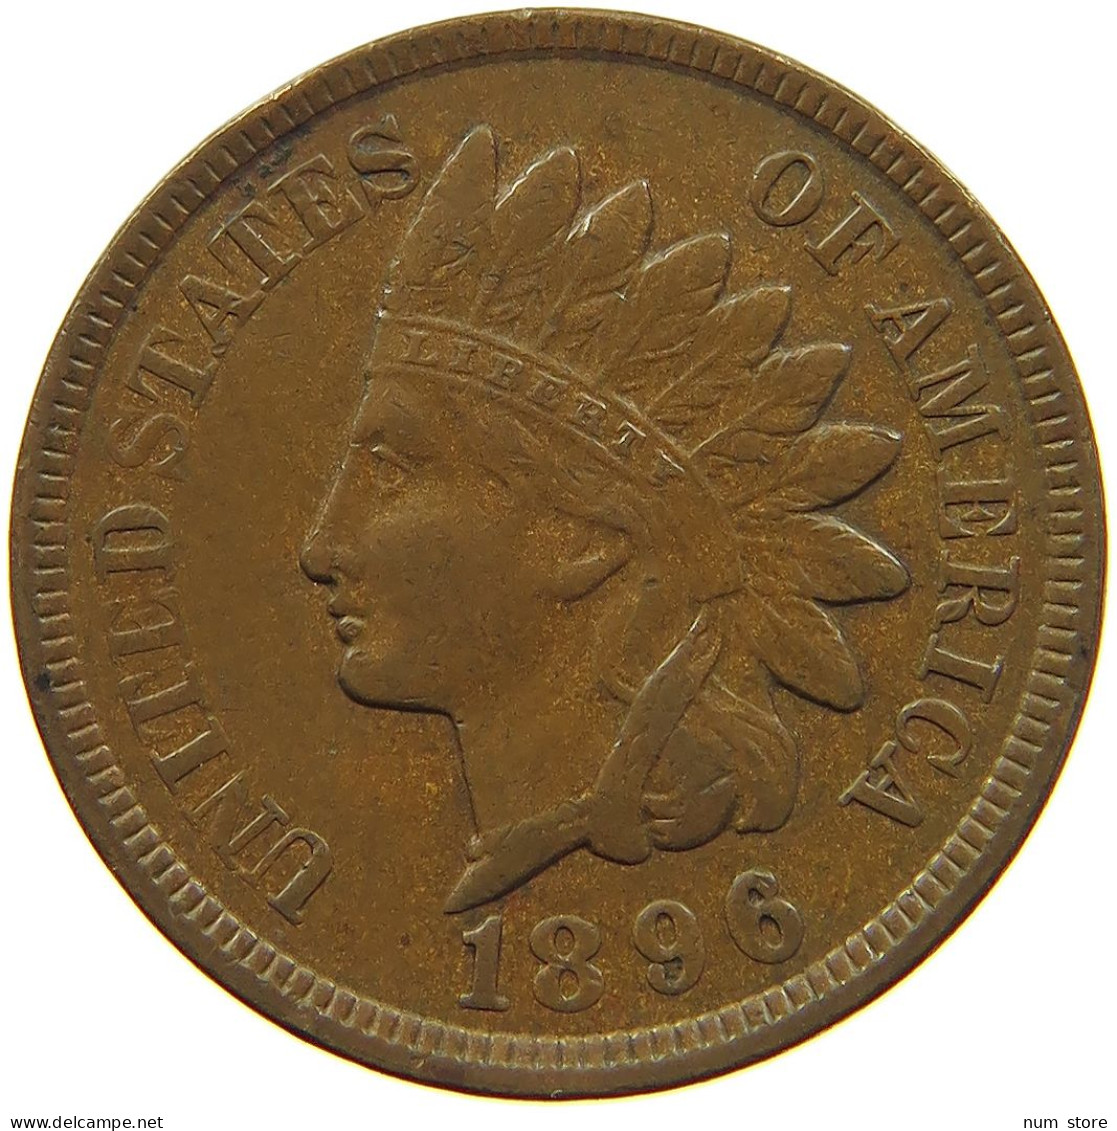 UNITED STATES OF AMERICA CENT 1896 INDIAN #s083 0571 - 1859-1909: Indian Head